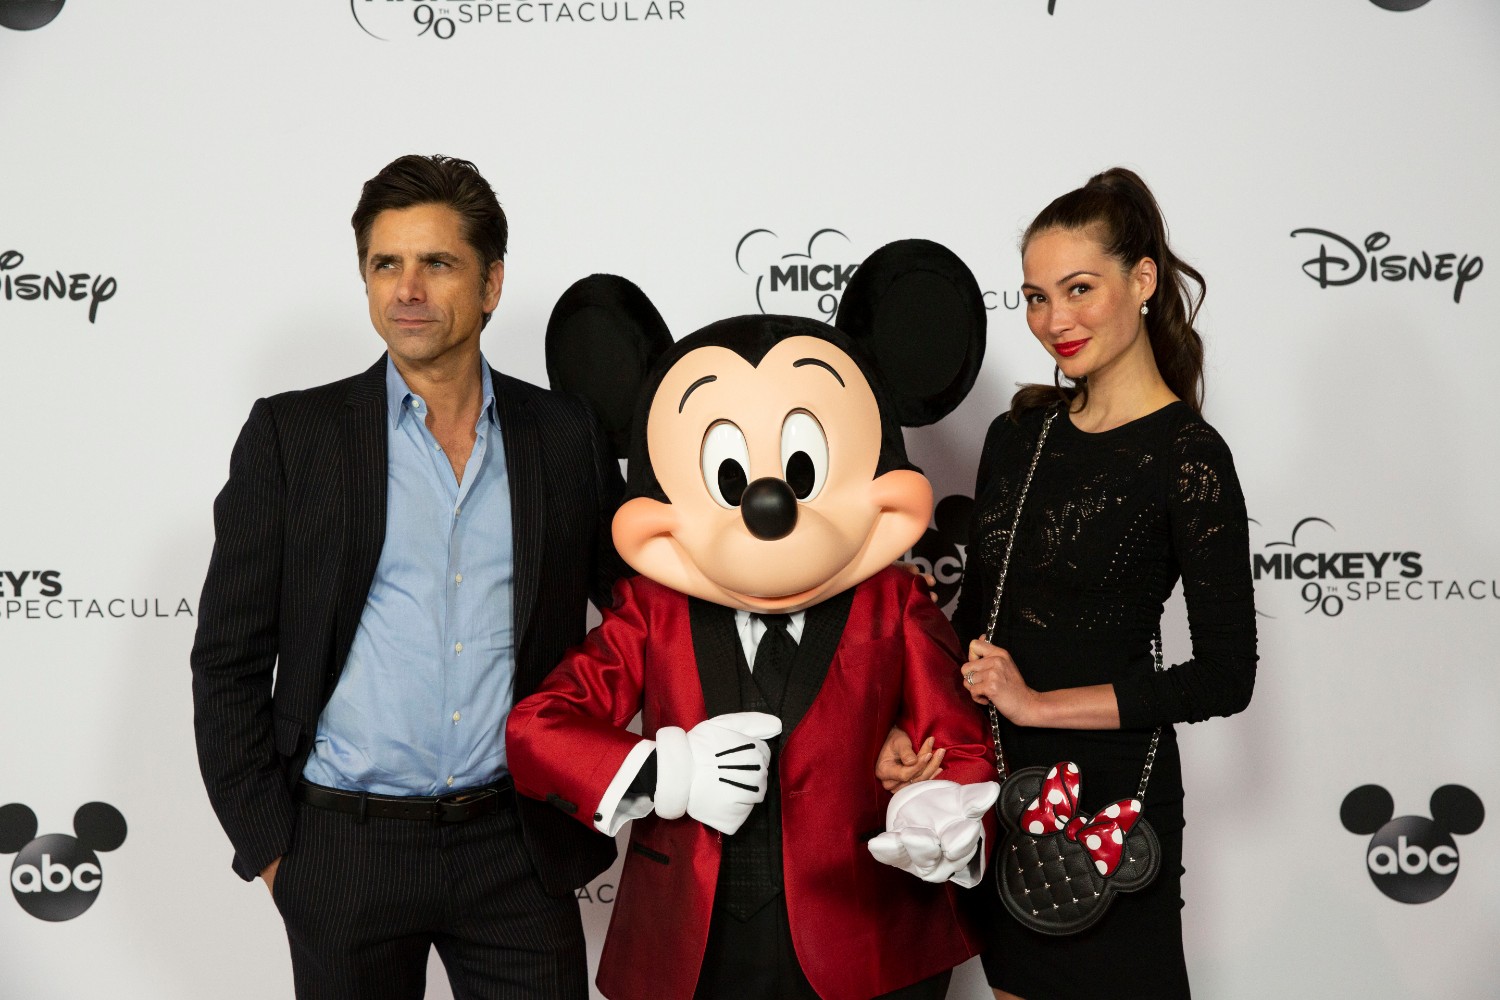 Caitlin McHugh and John Stamos at Mickey Mouse's 90th Spectacular